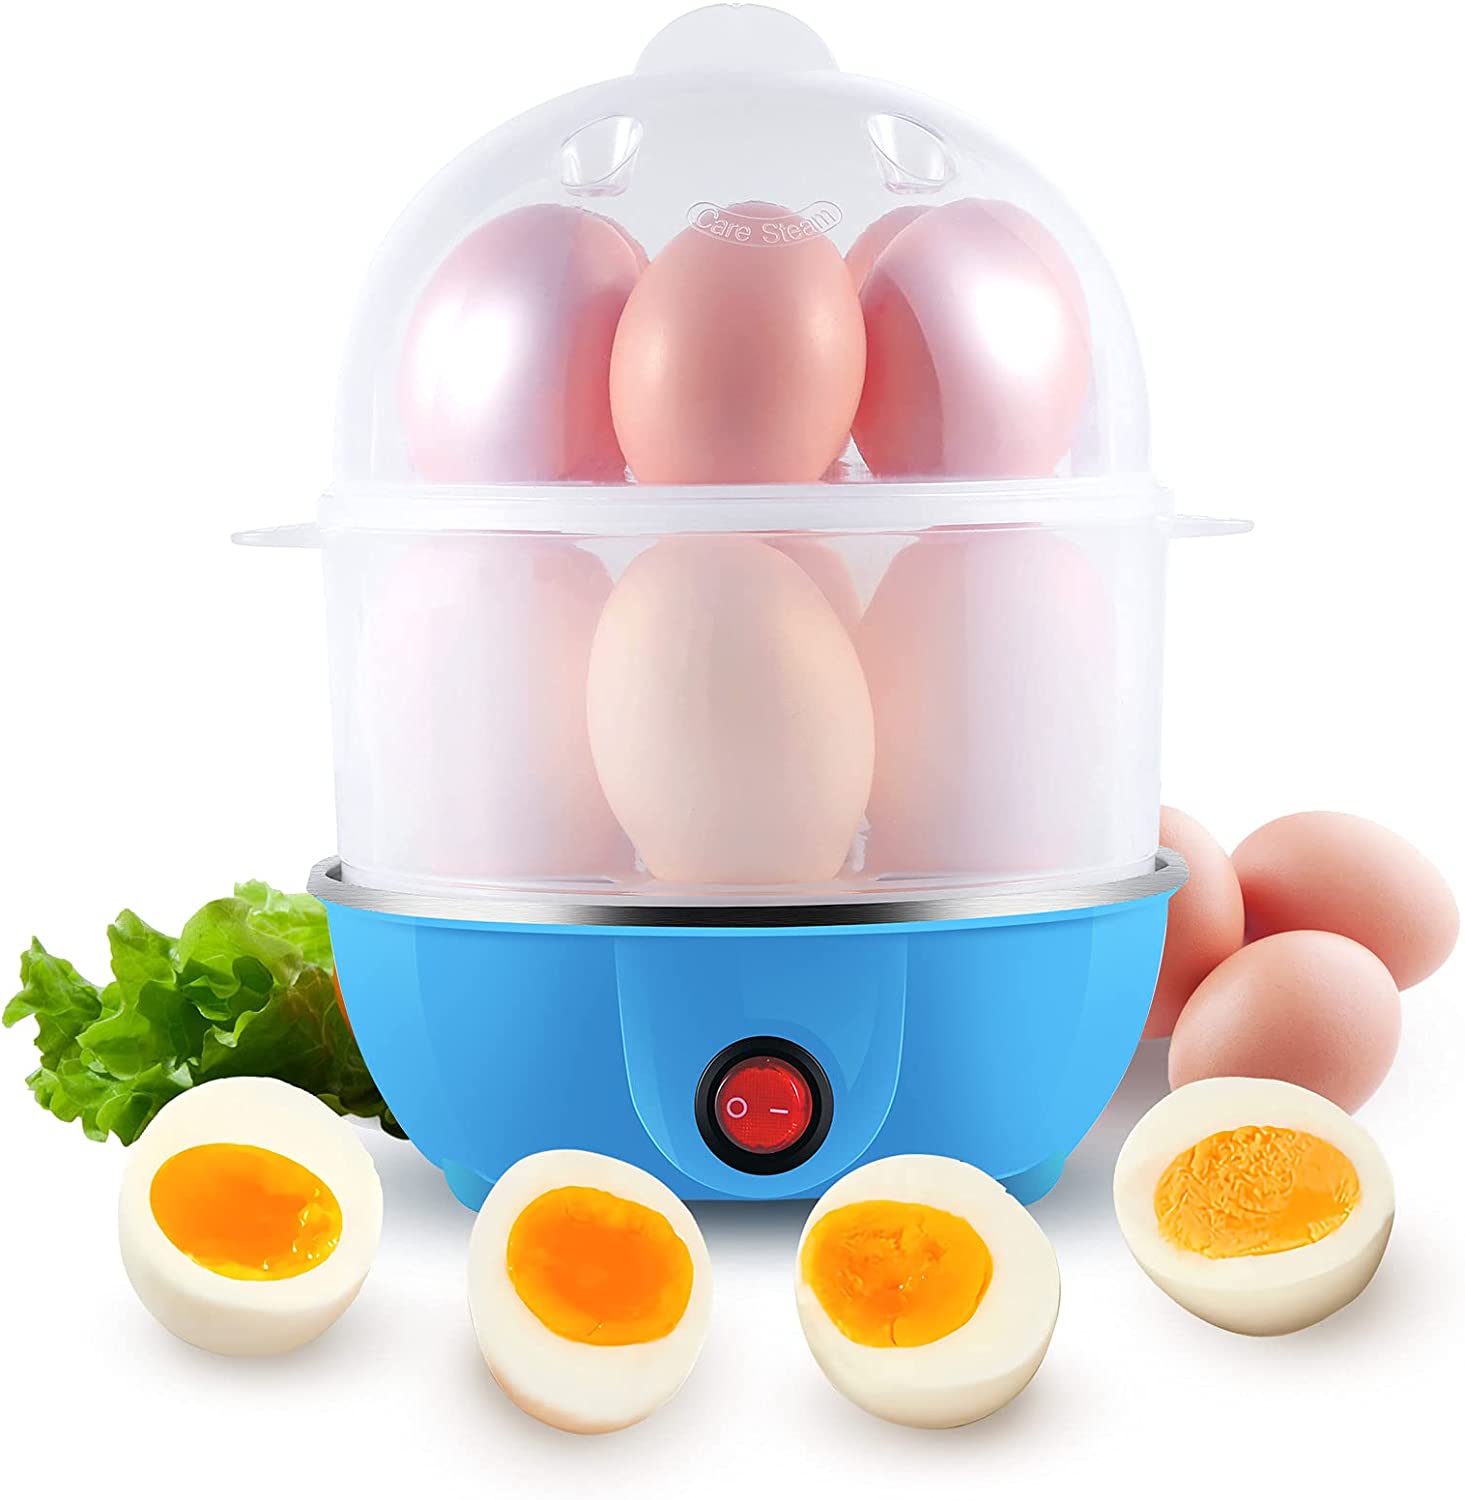 Uten 350 W egg cooker for 12 eggs, electric egg head test winner, double egg cooker with egg cup, stainless steel shell, heating protection, BPA-free, indicator light [energy class A+]